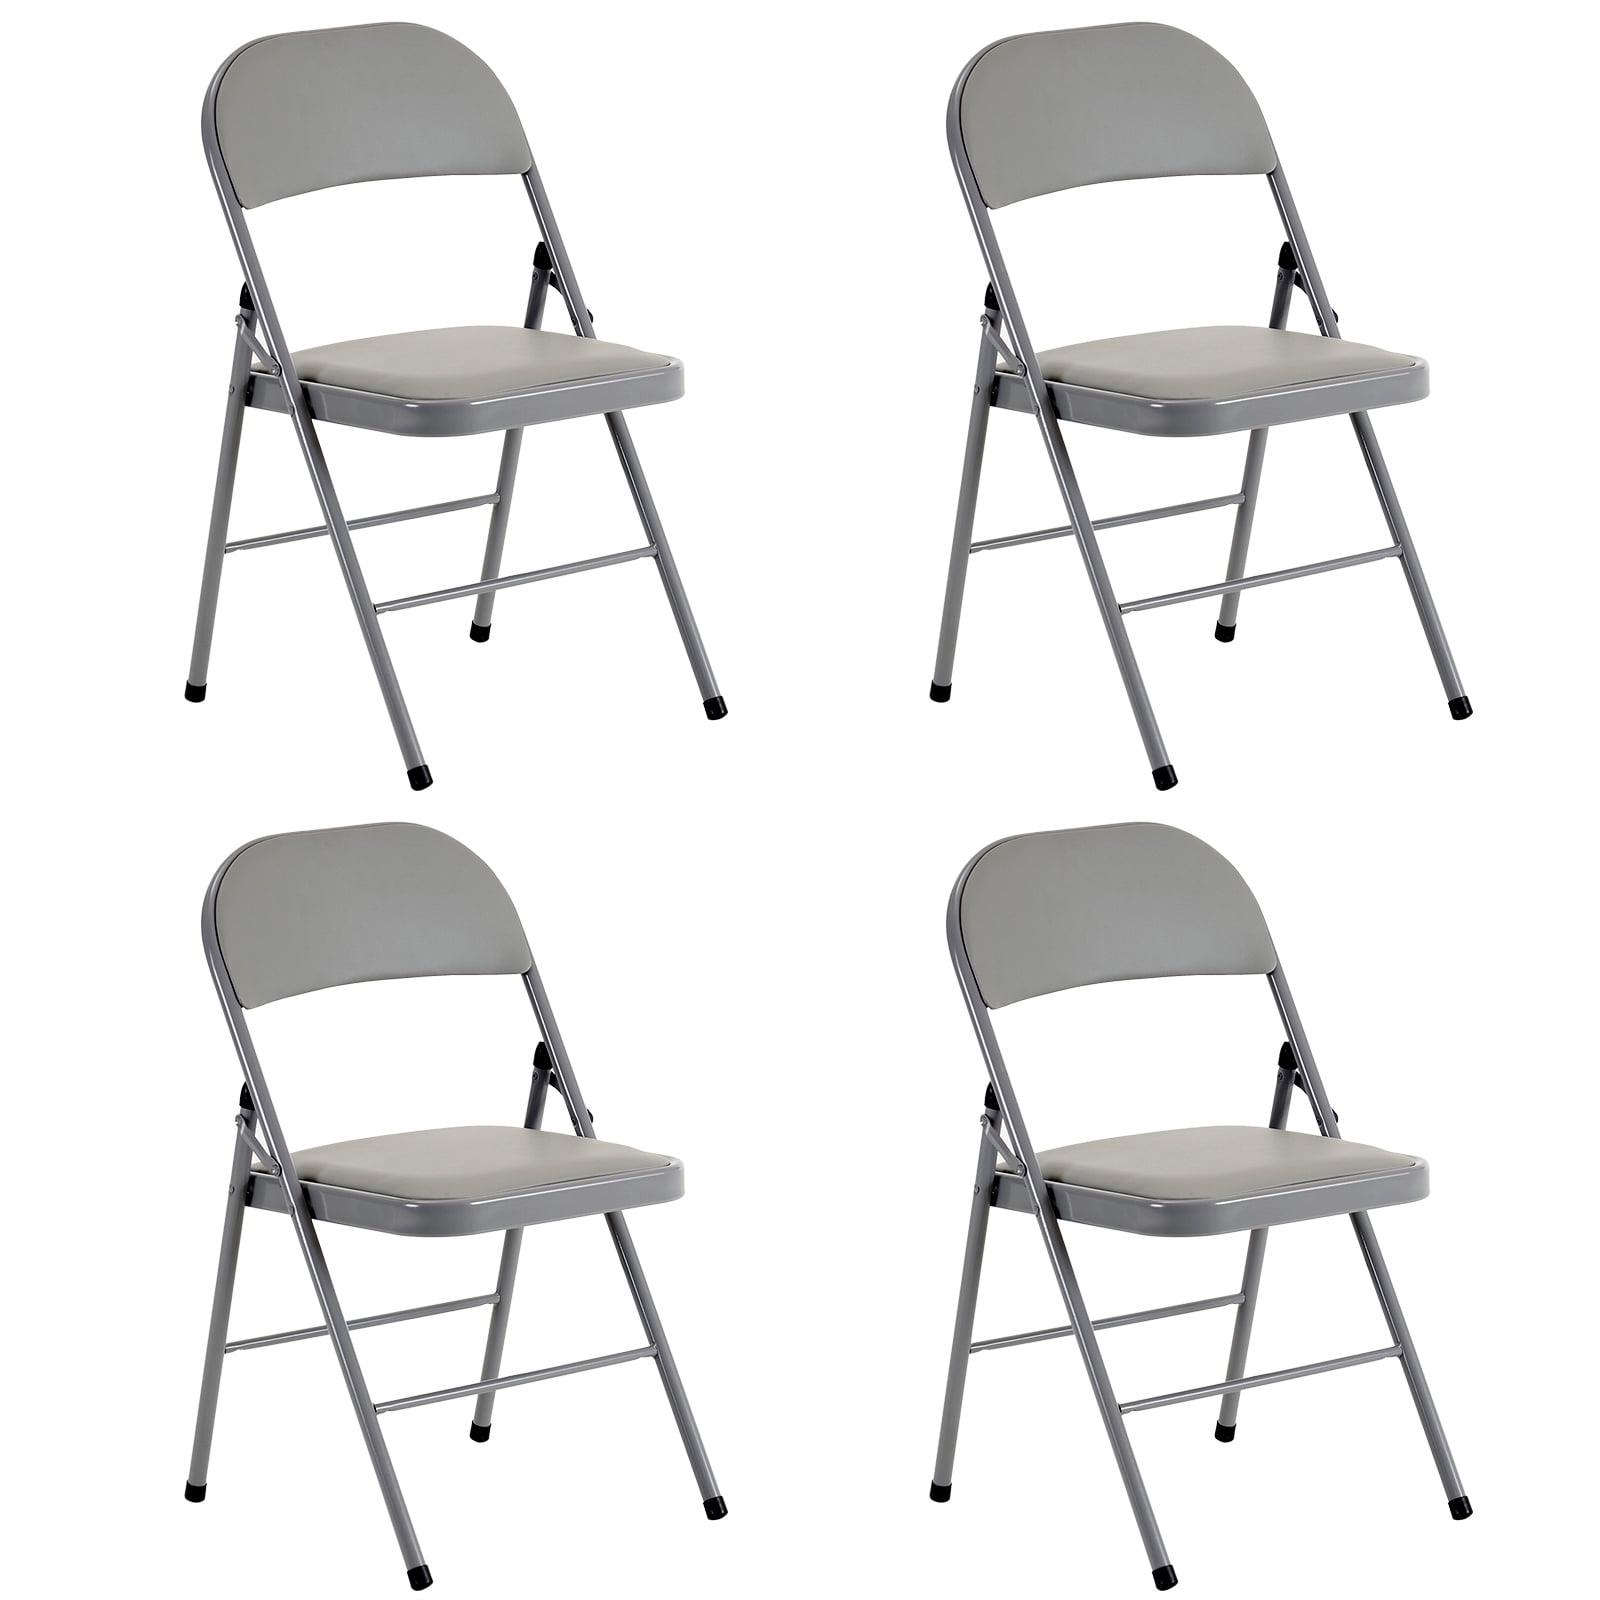 UBesGoo Set of 4 Padded Folding Chair Portable Dining Chairs Heavy Duty  Party Chairs with Metal Frame Gray